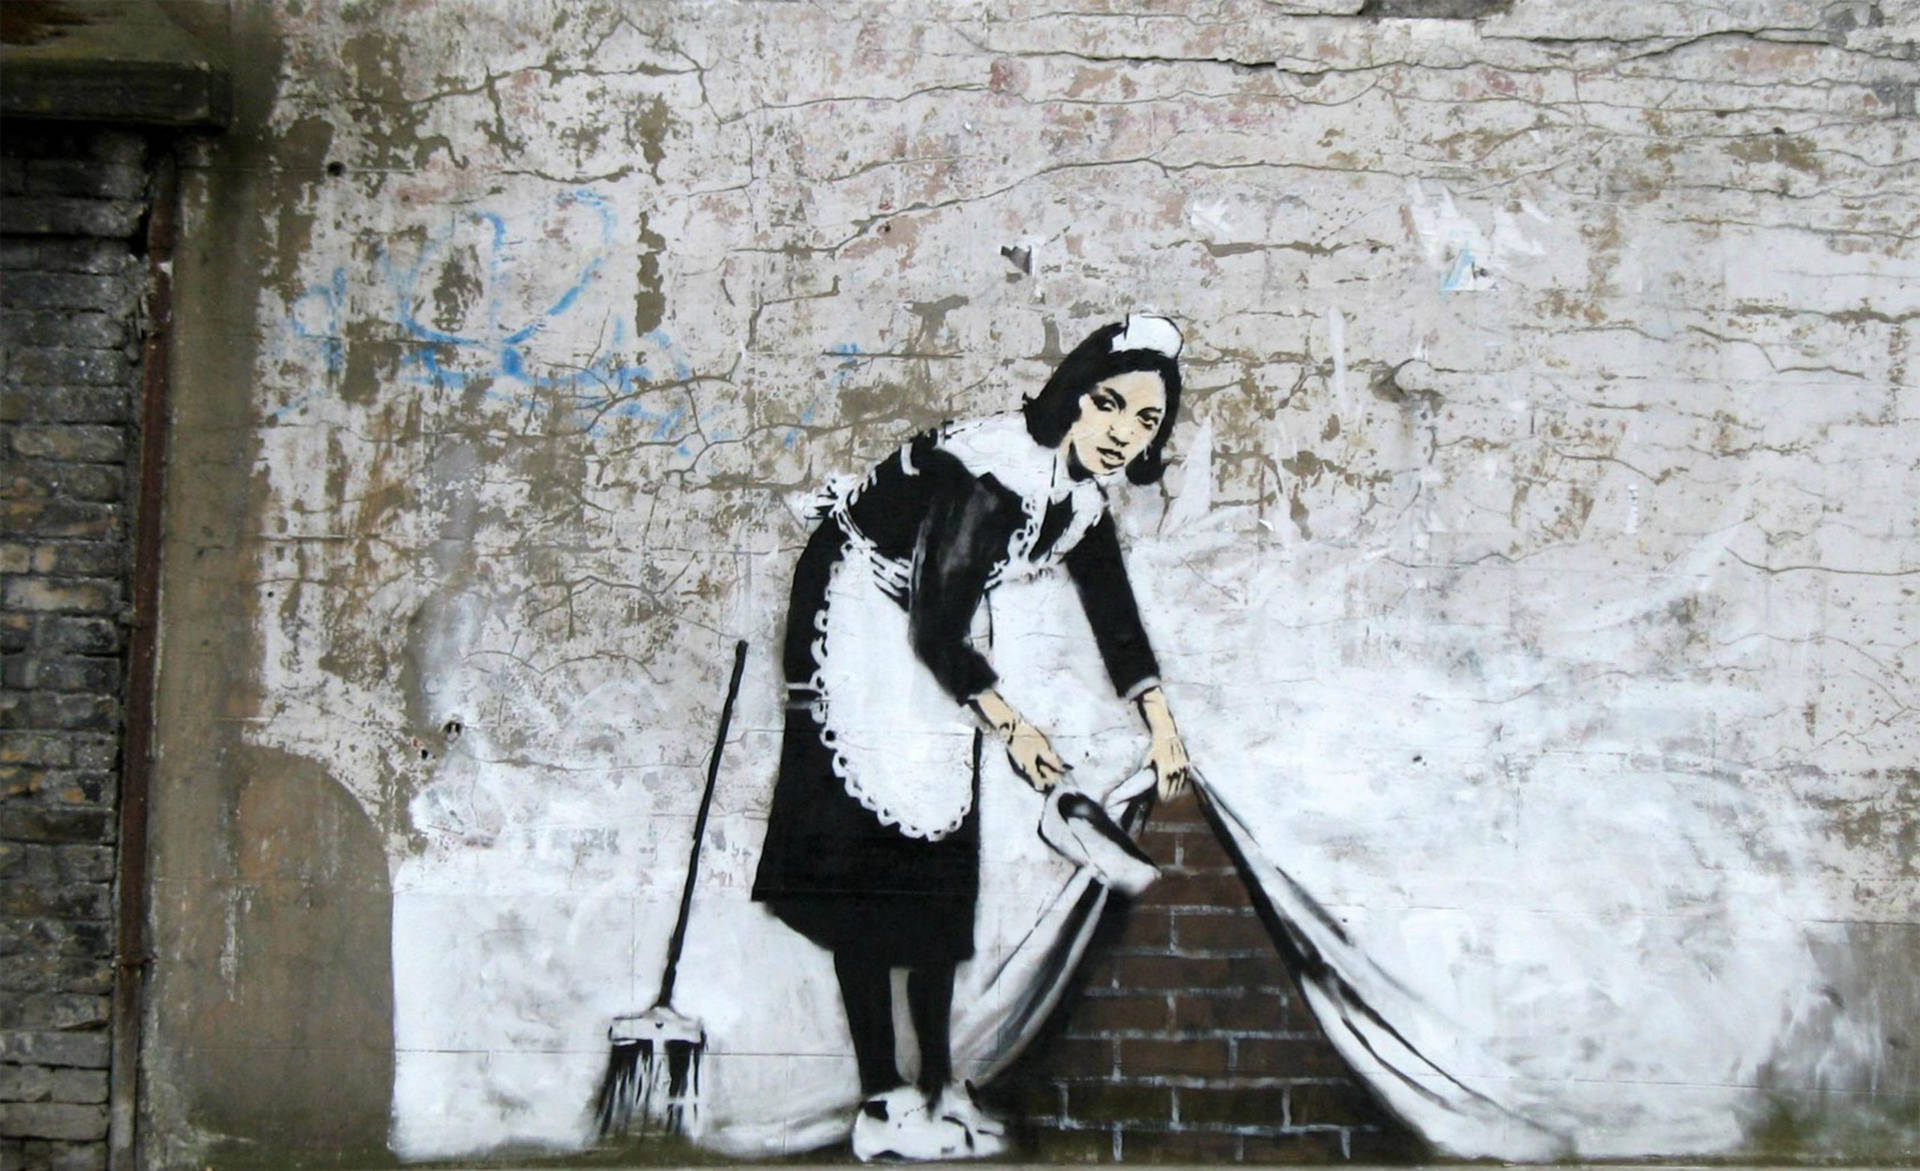 A Profound Display Of Street Art By Banksy